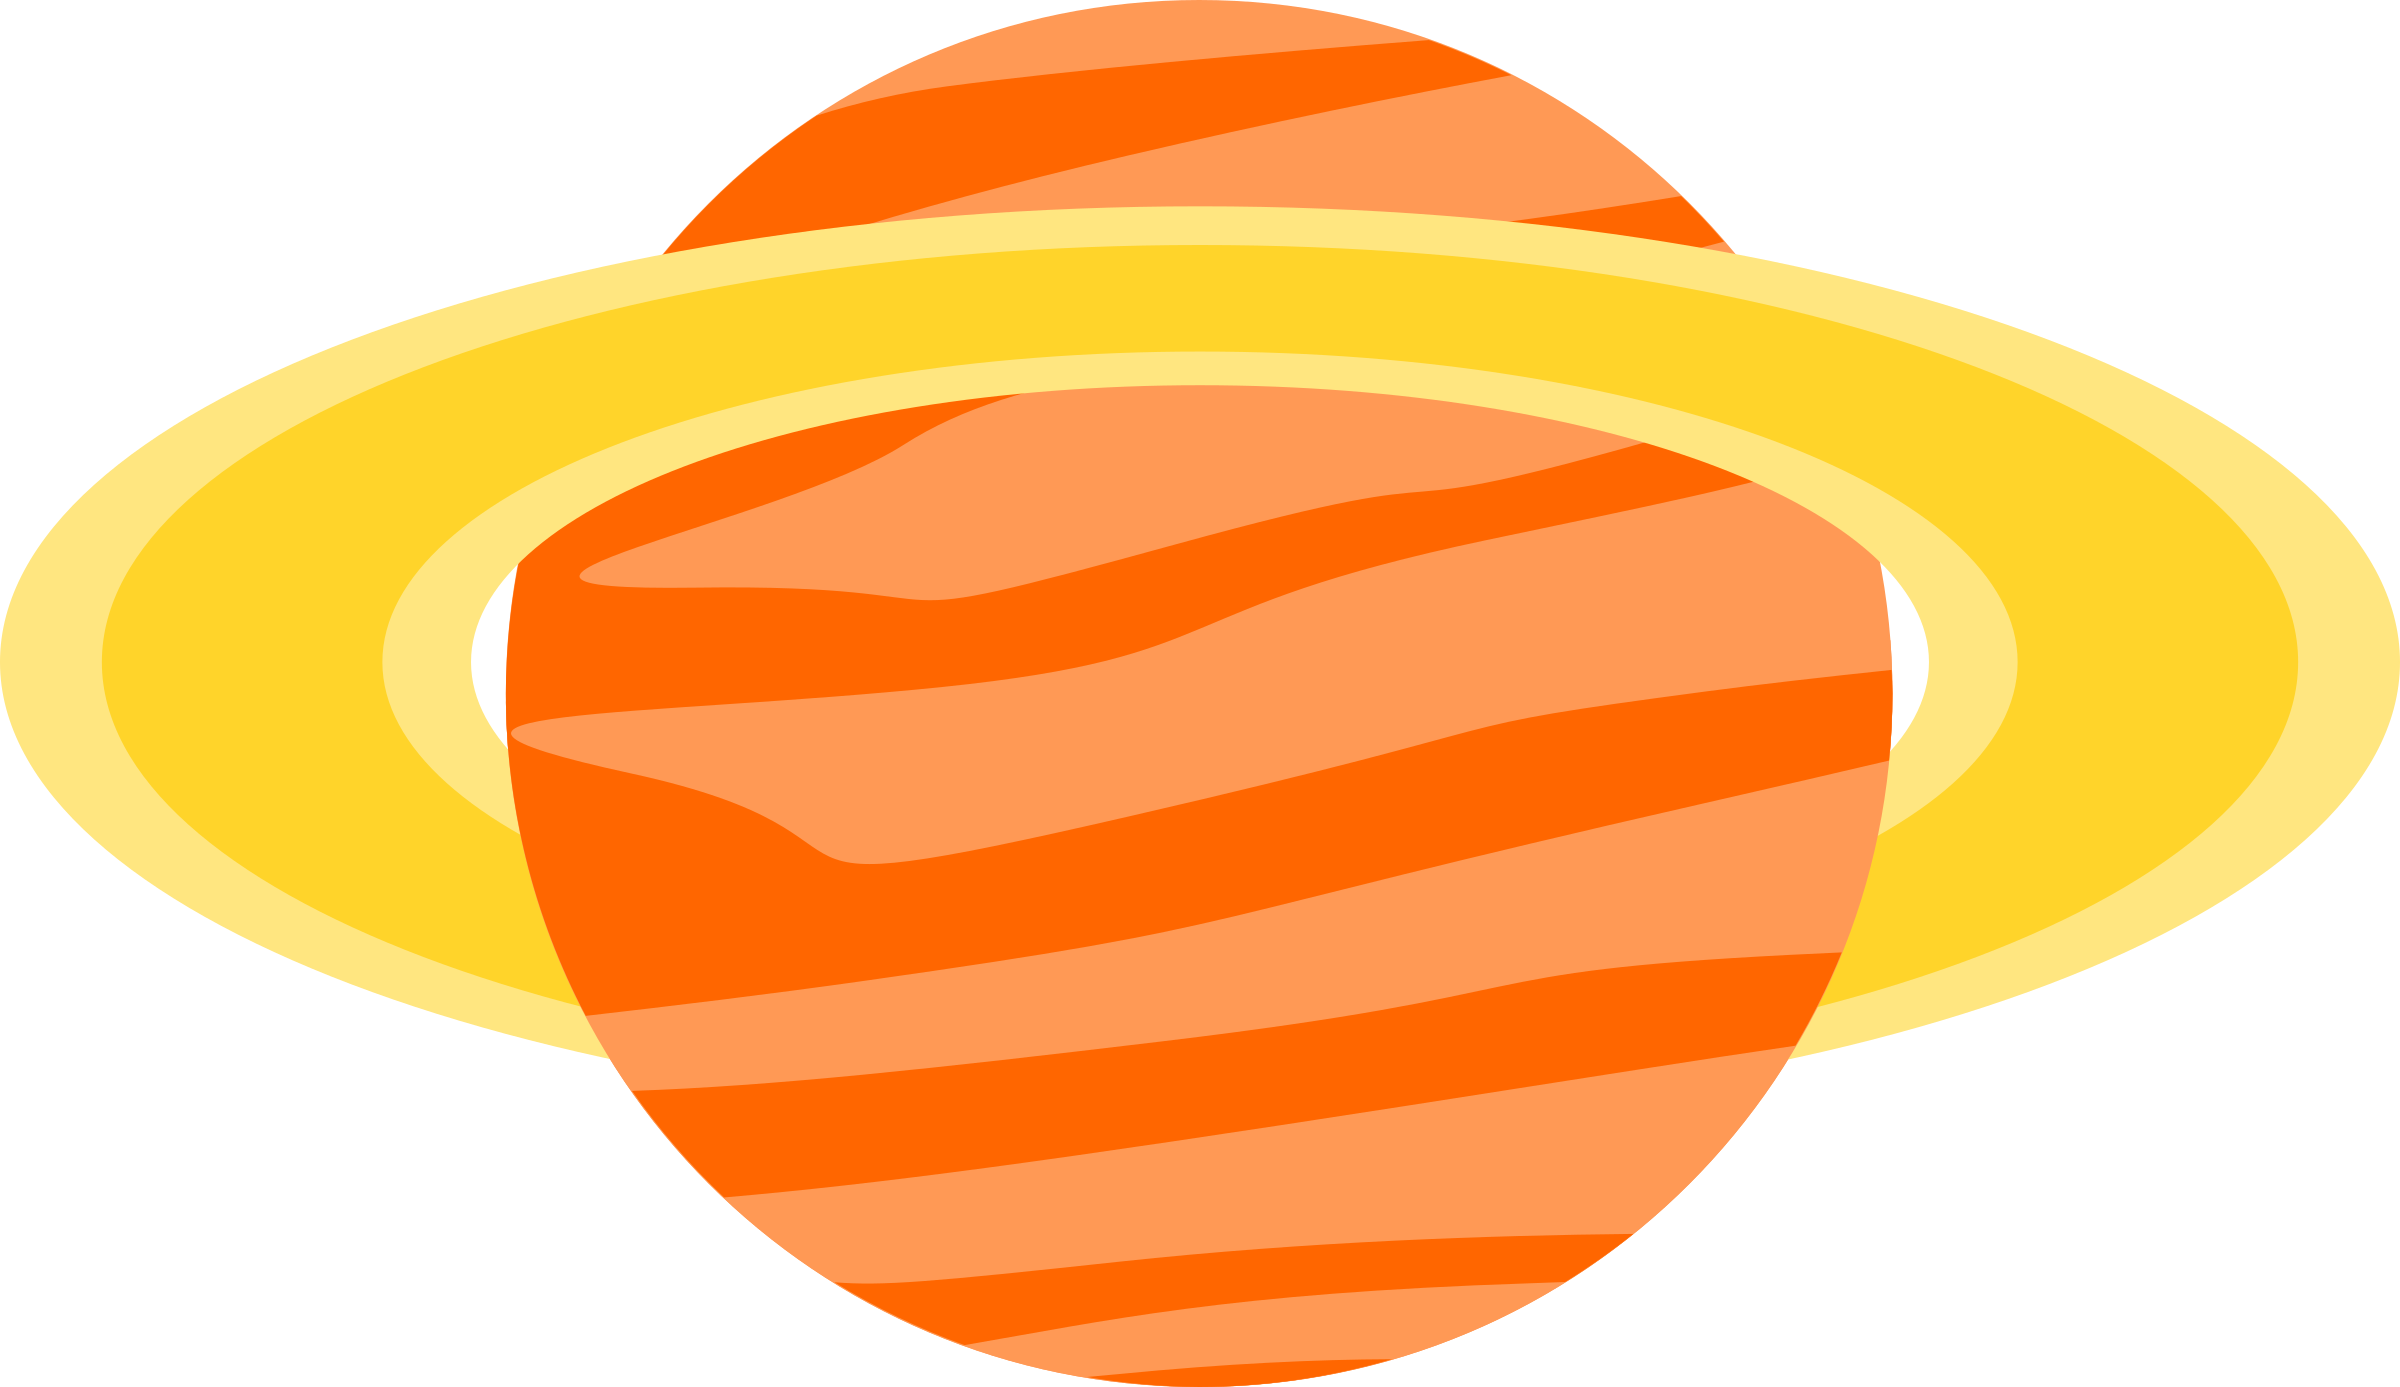 A Cartoon Of A Planet With Rings